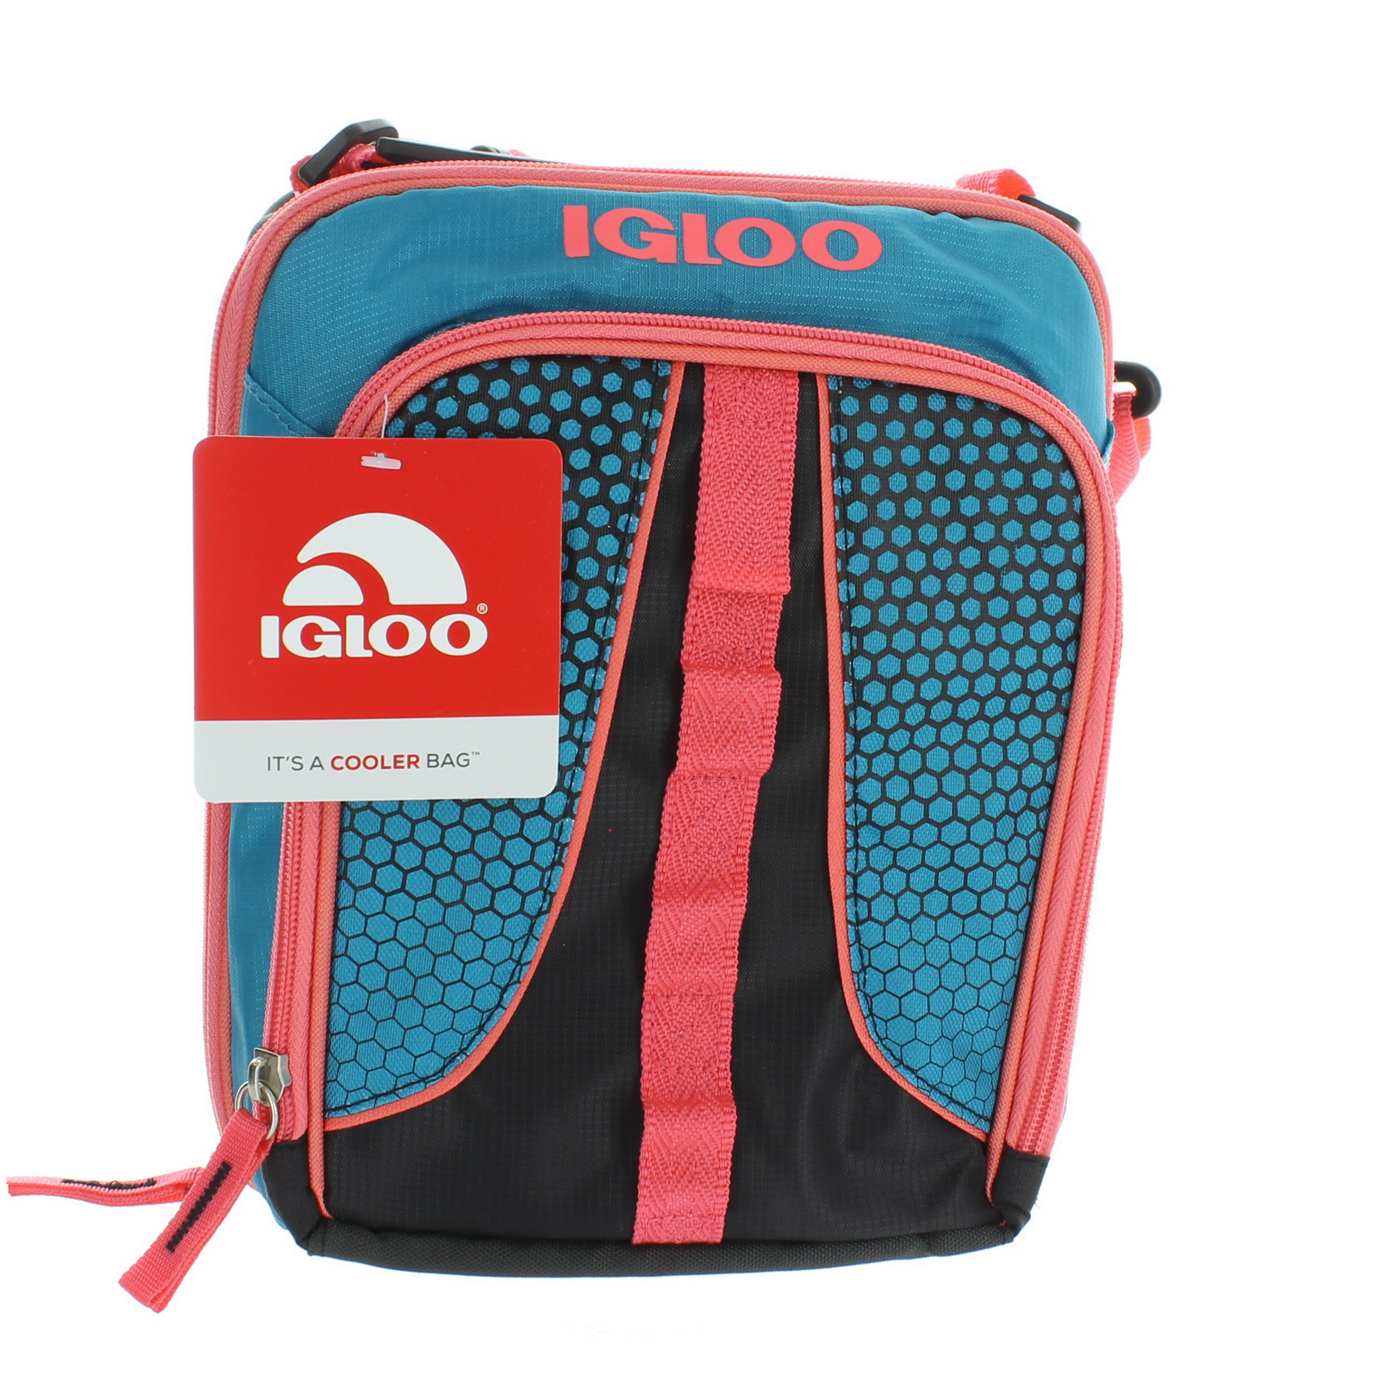 Igloo Vertical Lunch Kit Hot Brights Girls; image 3 of 3